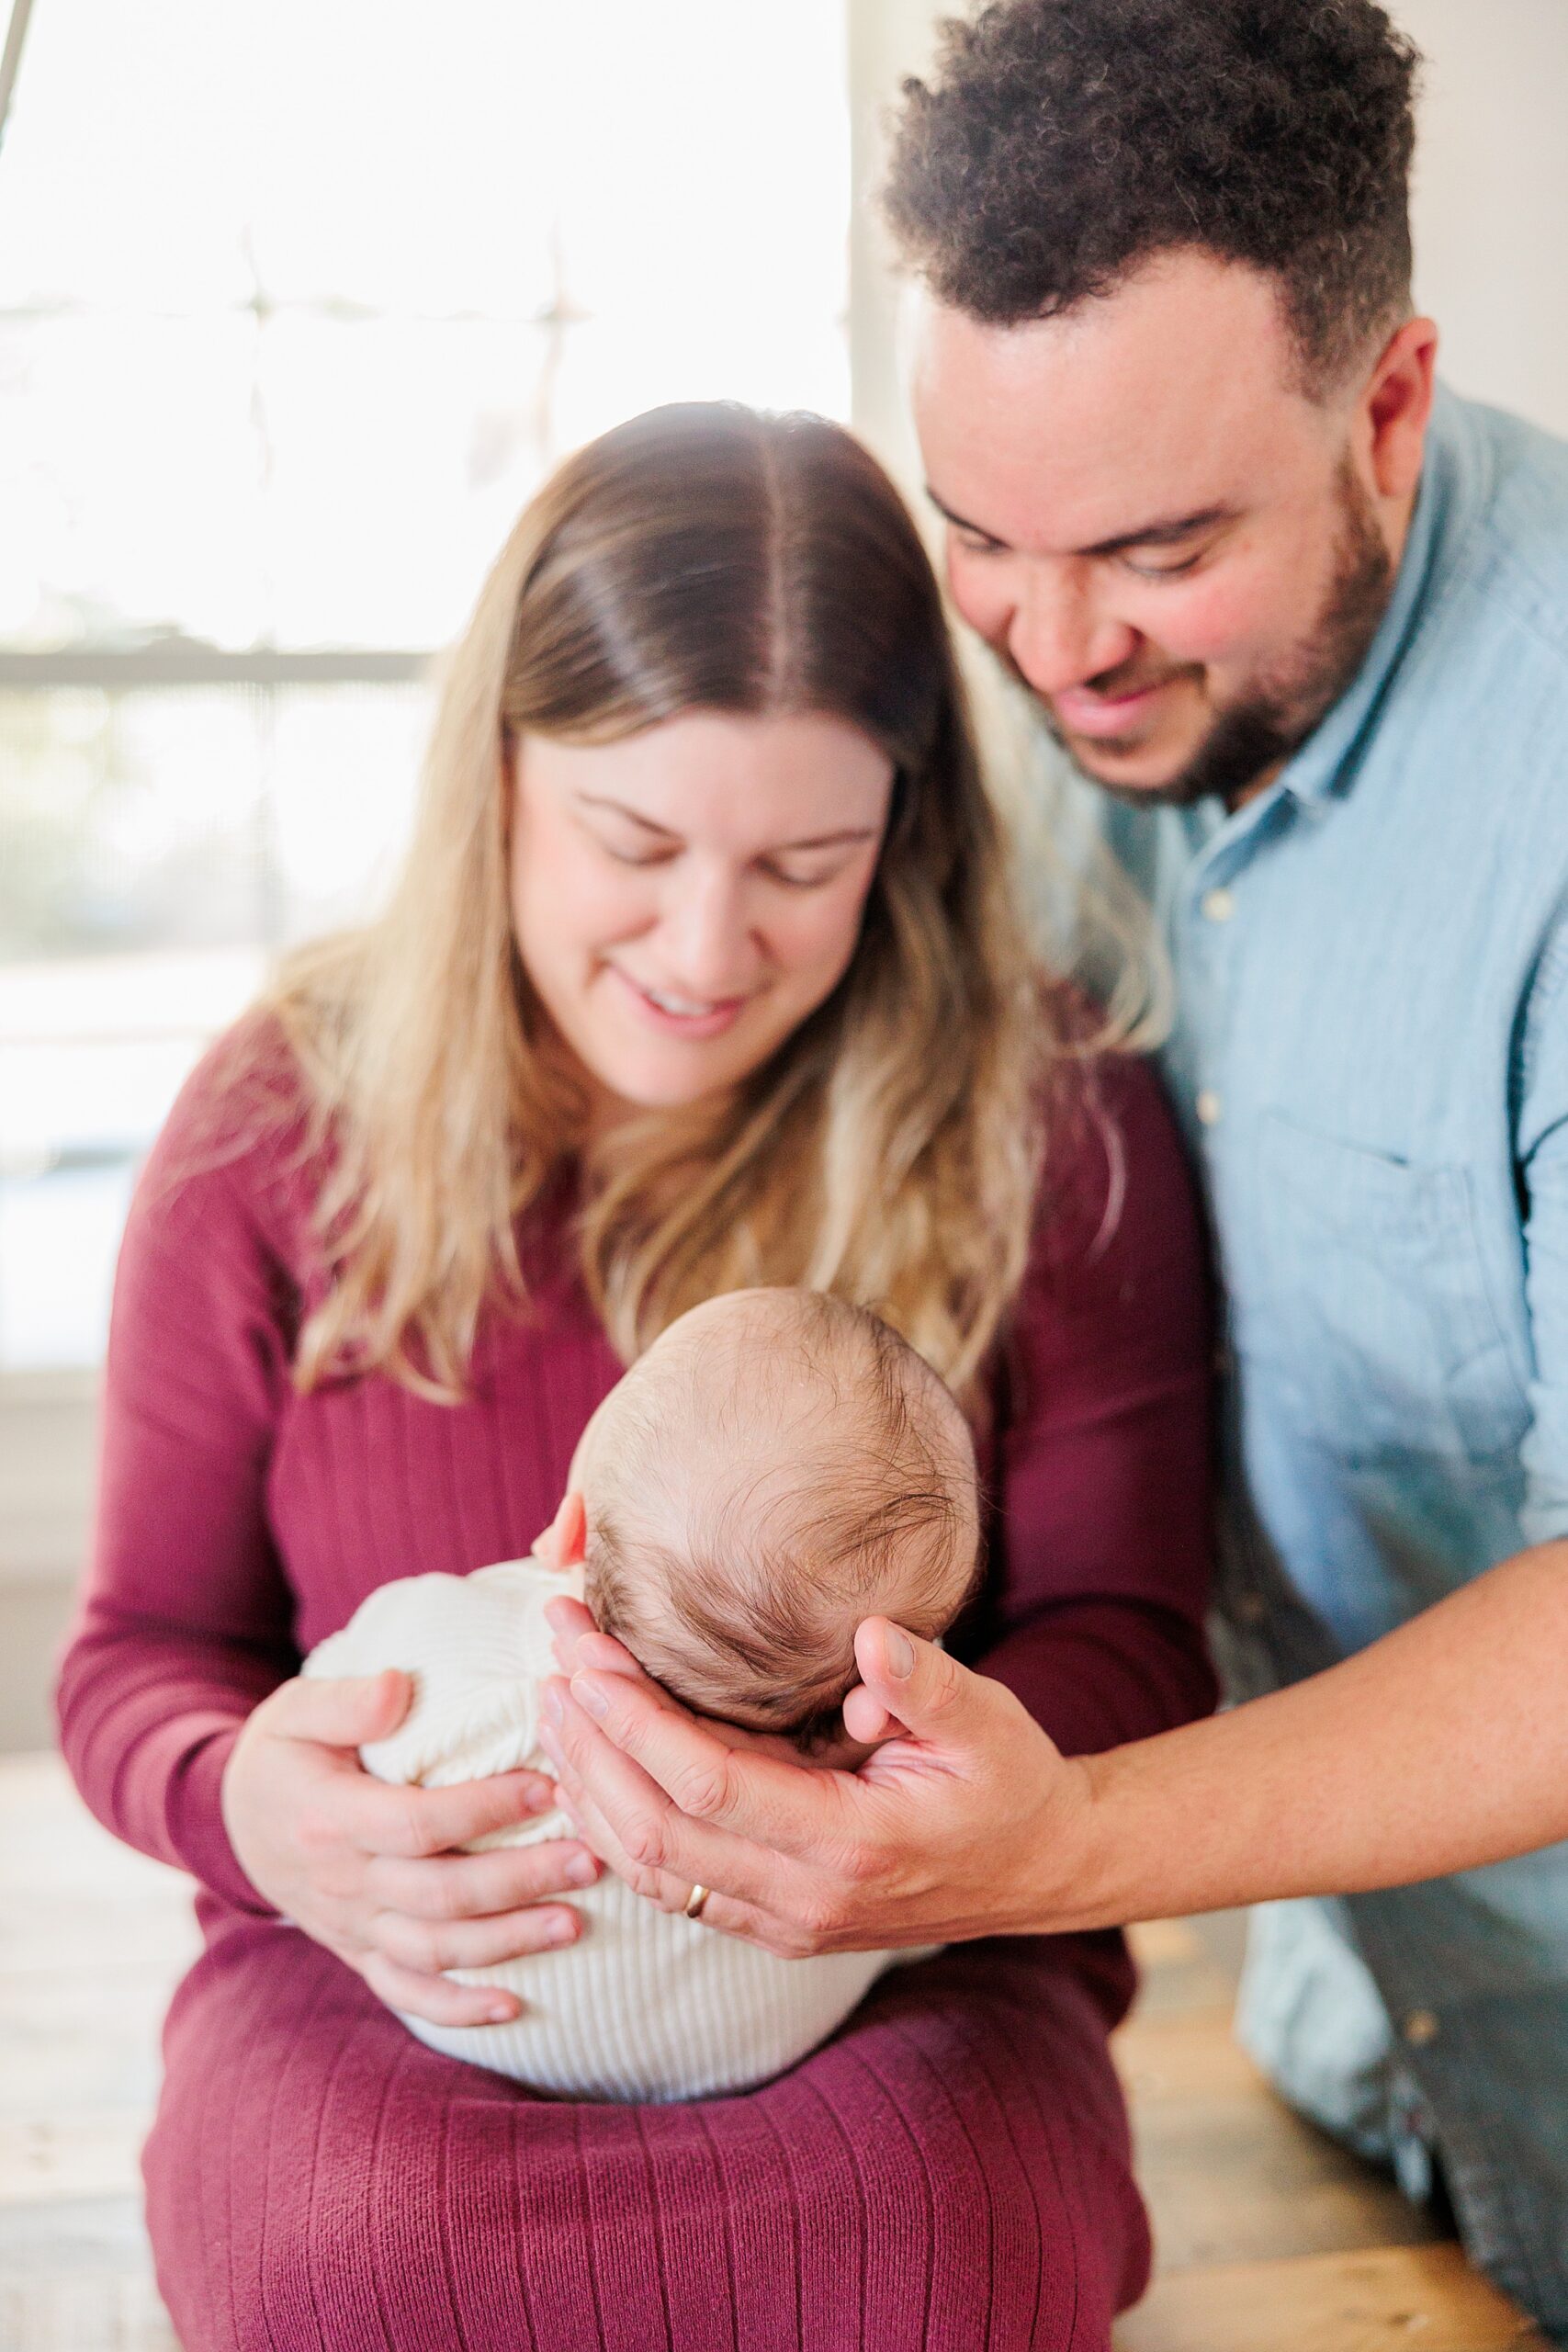 parents smile down at new baby girl in mom's hands during newborn photos at home